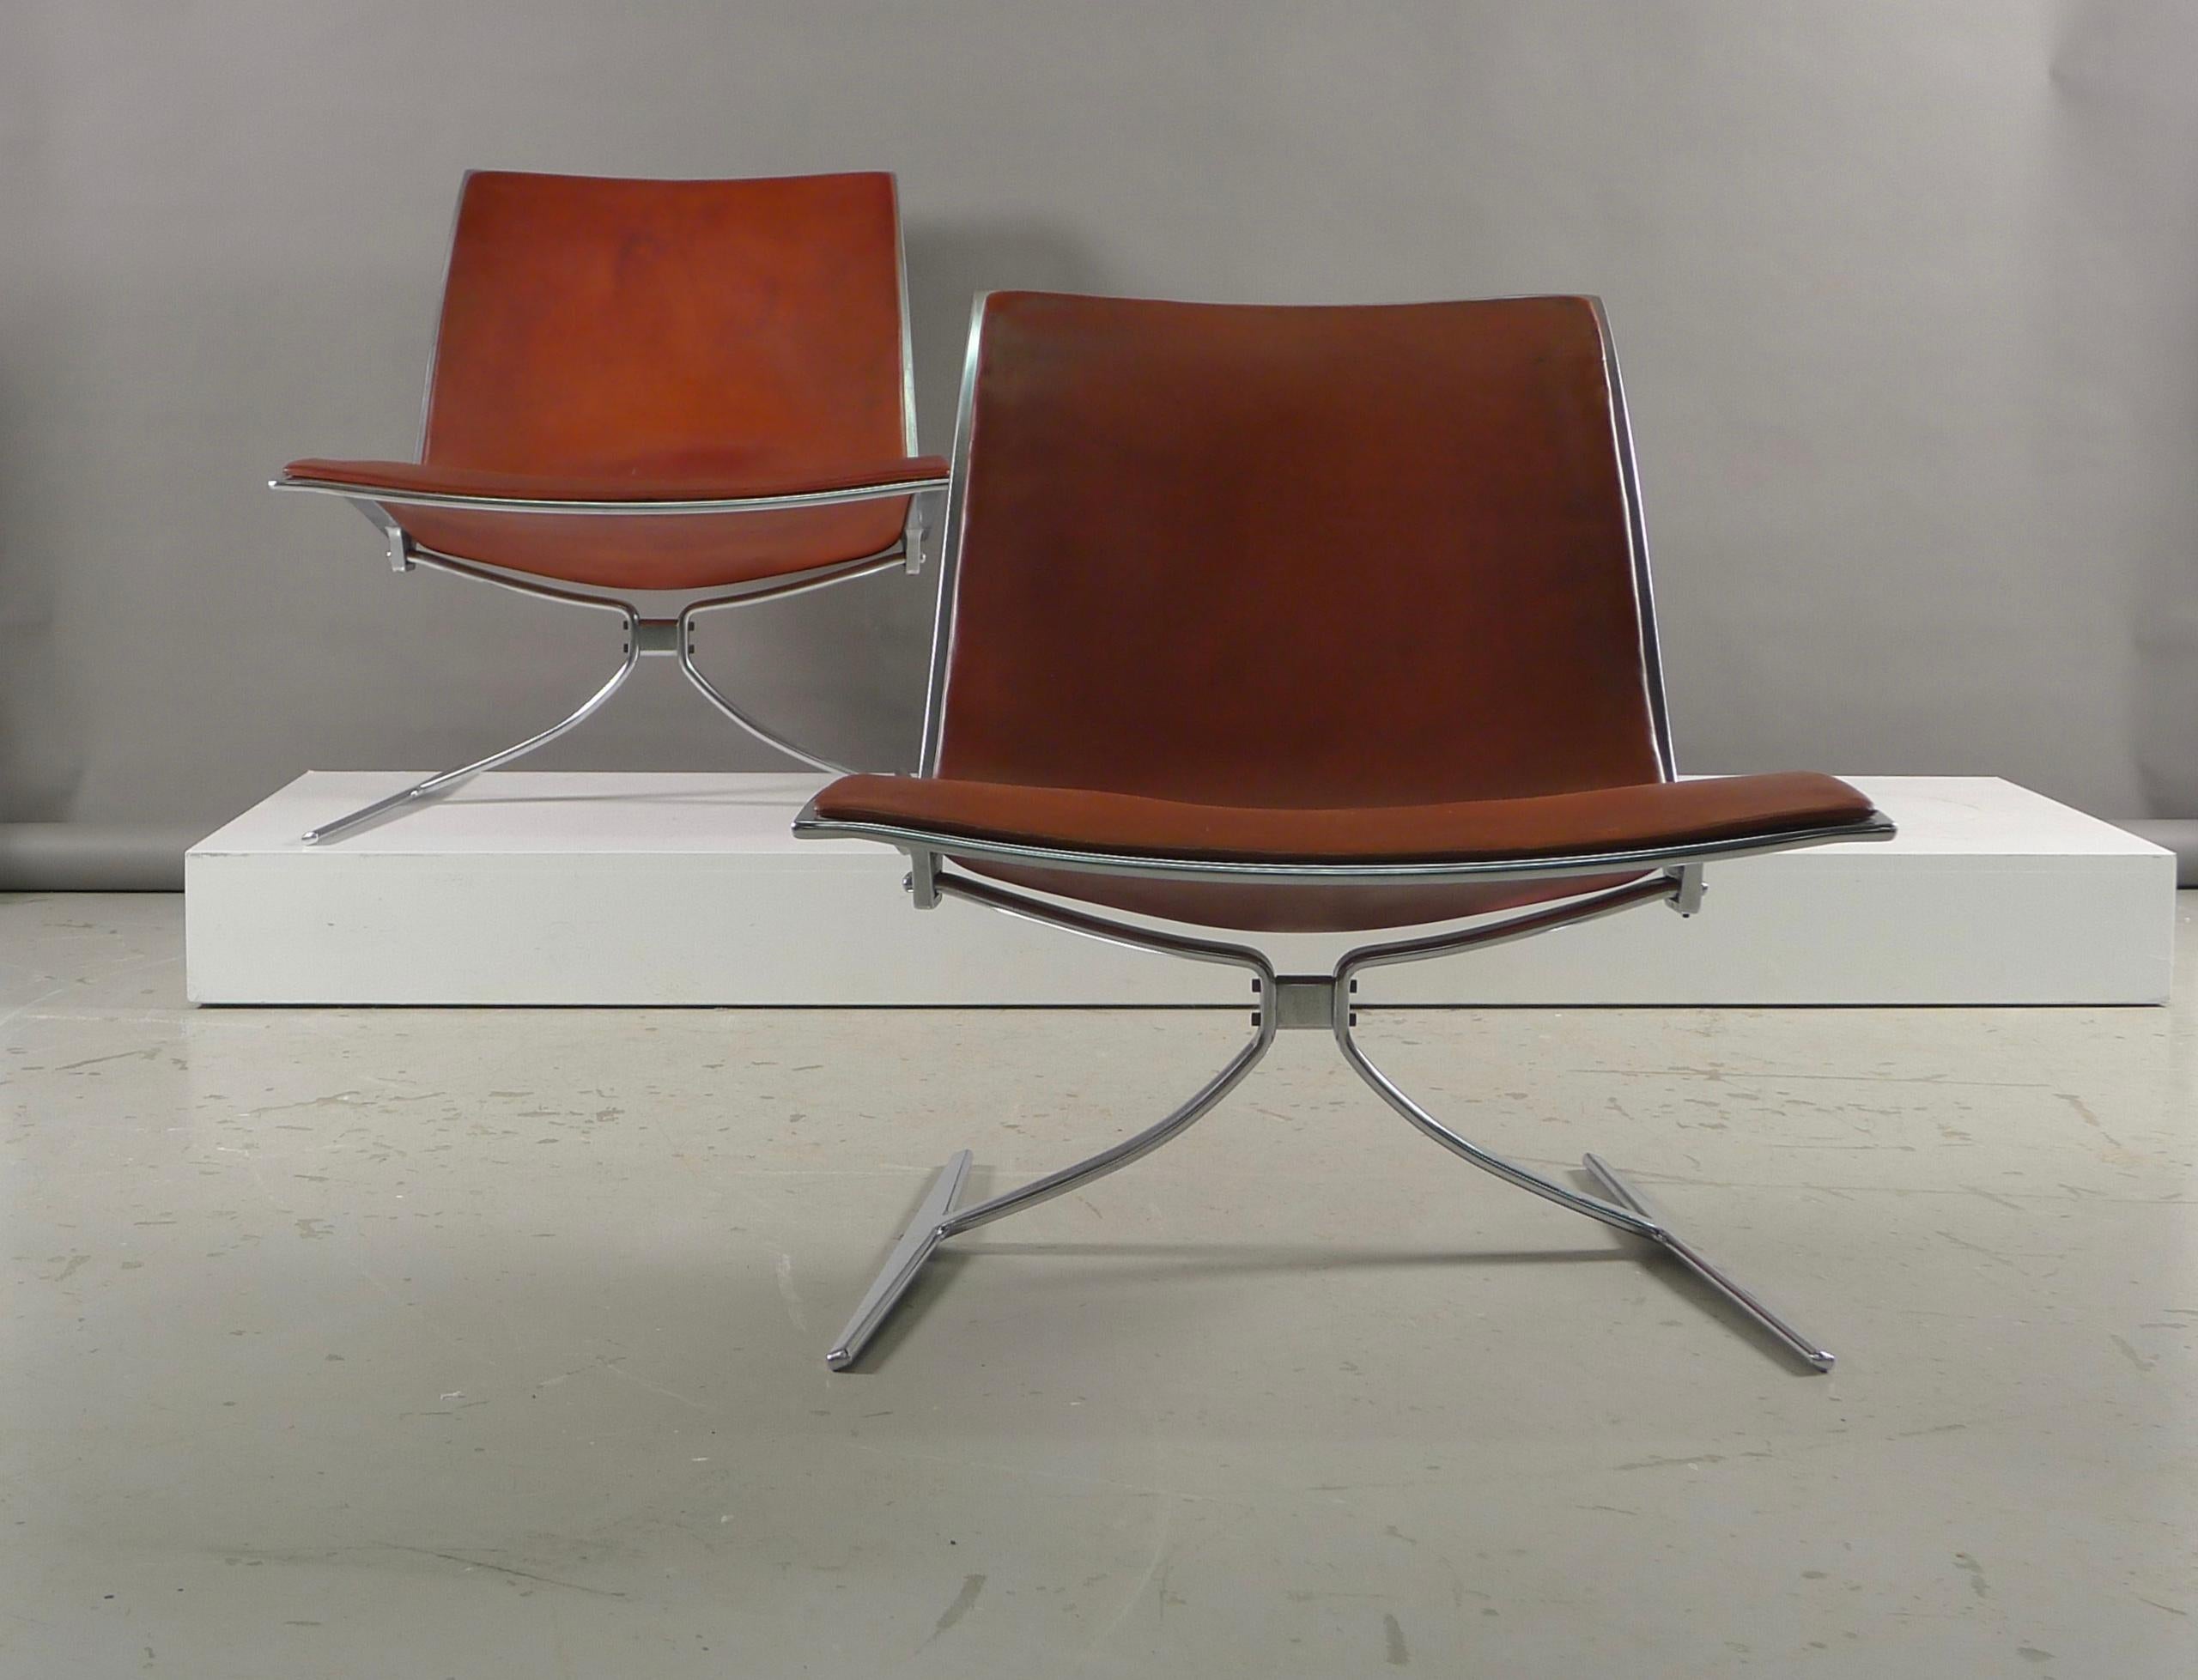 Fabricius & Kastholm, Pair of Skater Chairs in Original Cognac Leather, 1968 In Good Condition In Wargrave, Berkshire